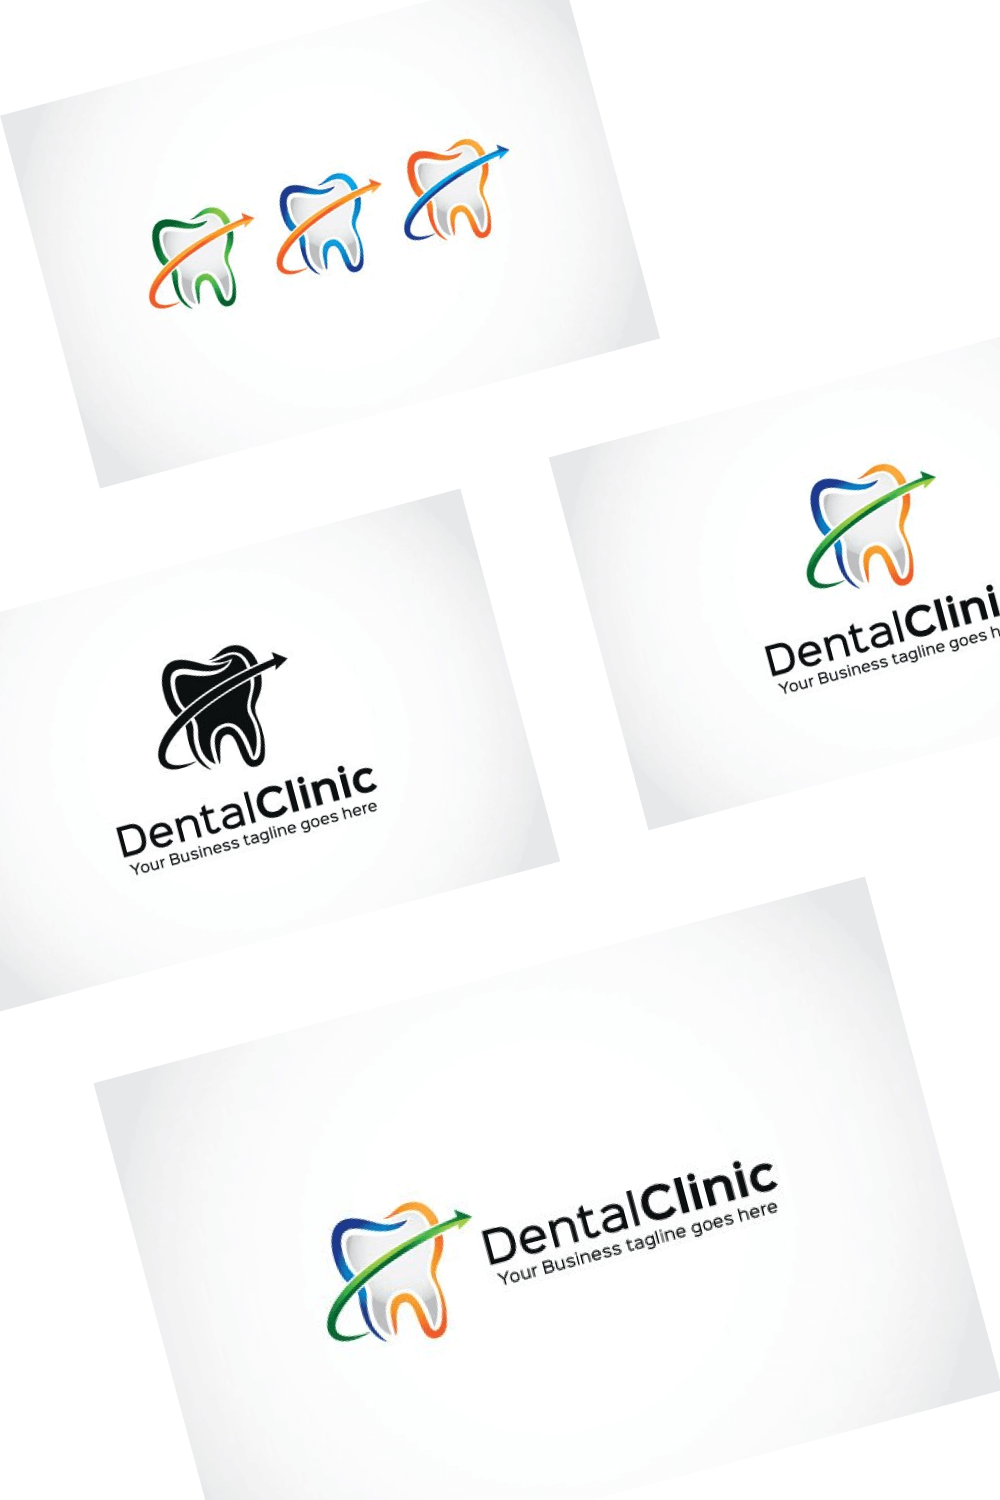 Diagonal Pictures of DentalClinic.